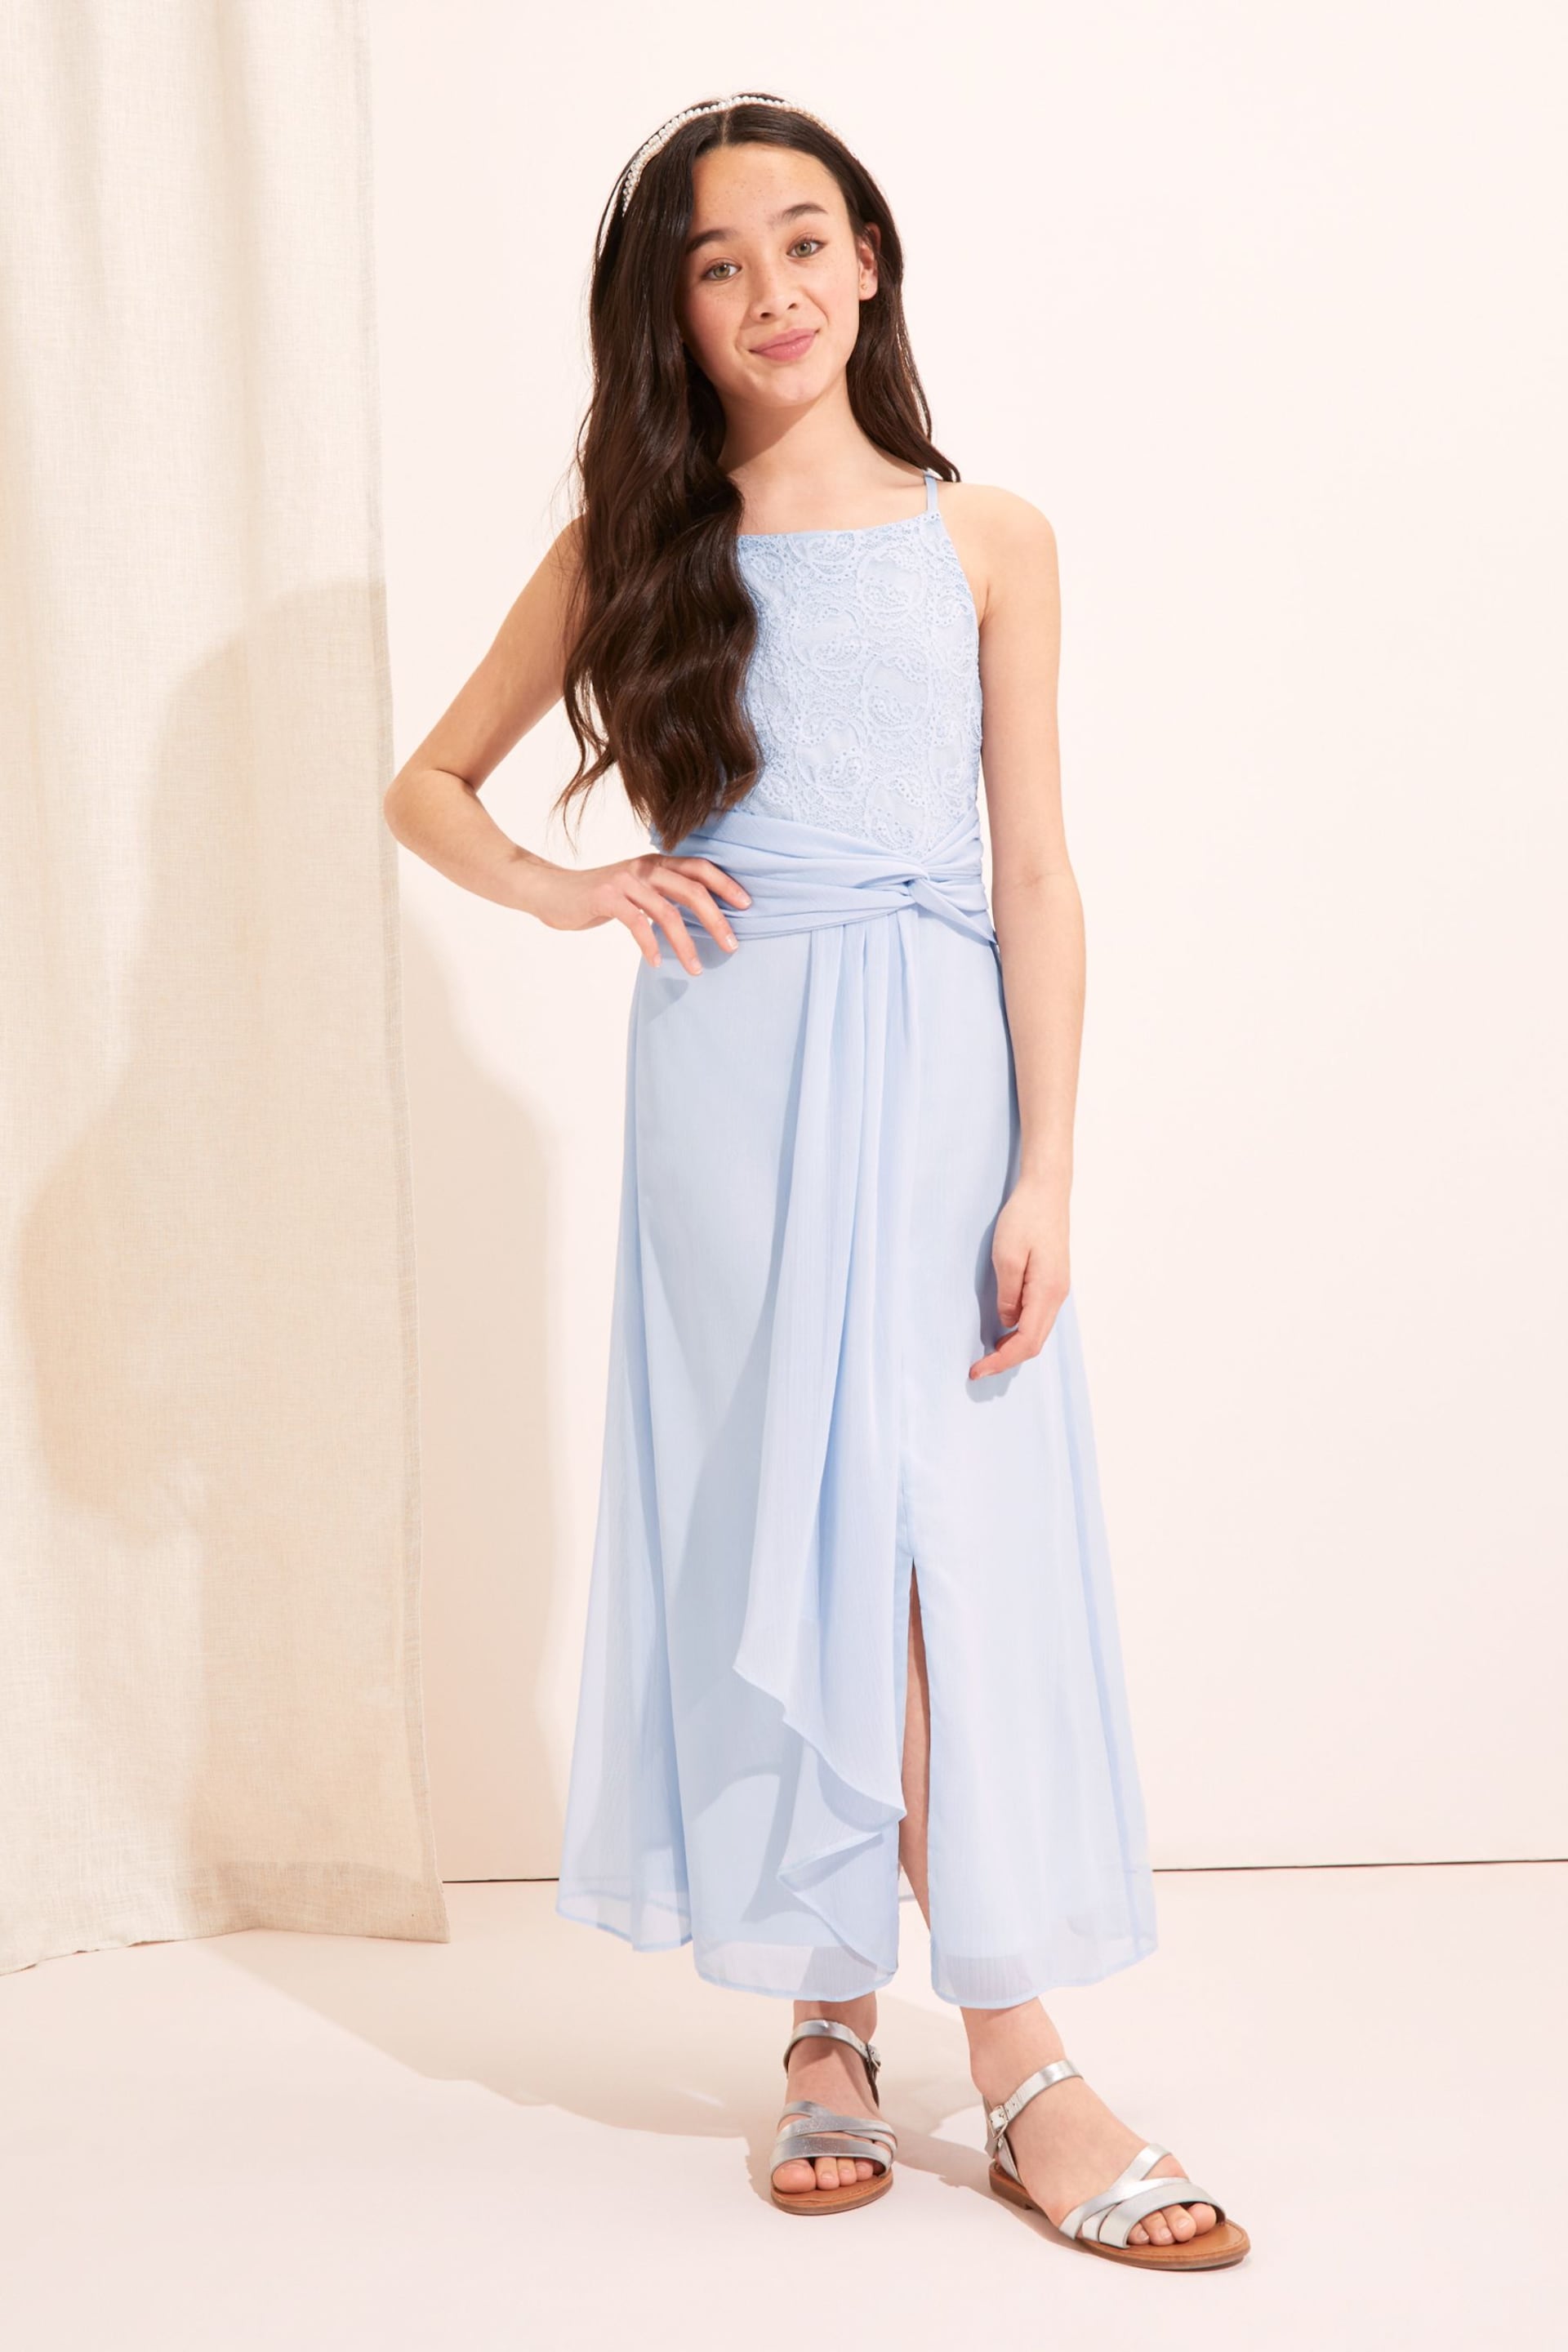 Lipsy Blue Lace Strap Maxi Occasion Dress (From 7-16yrs) - Image 1 of 4